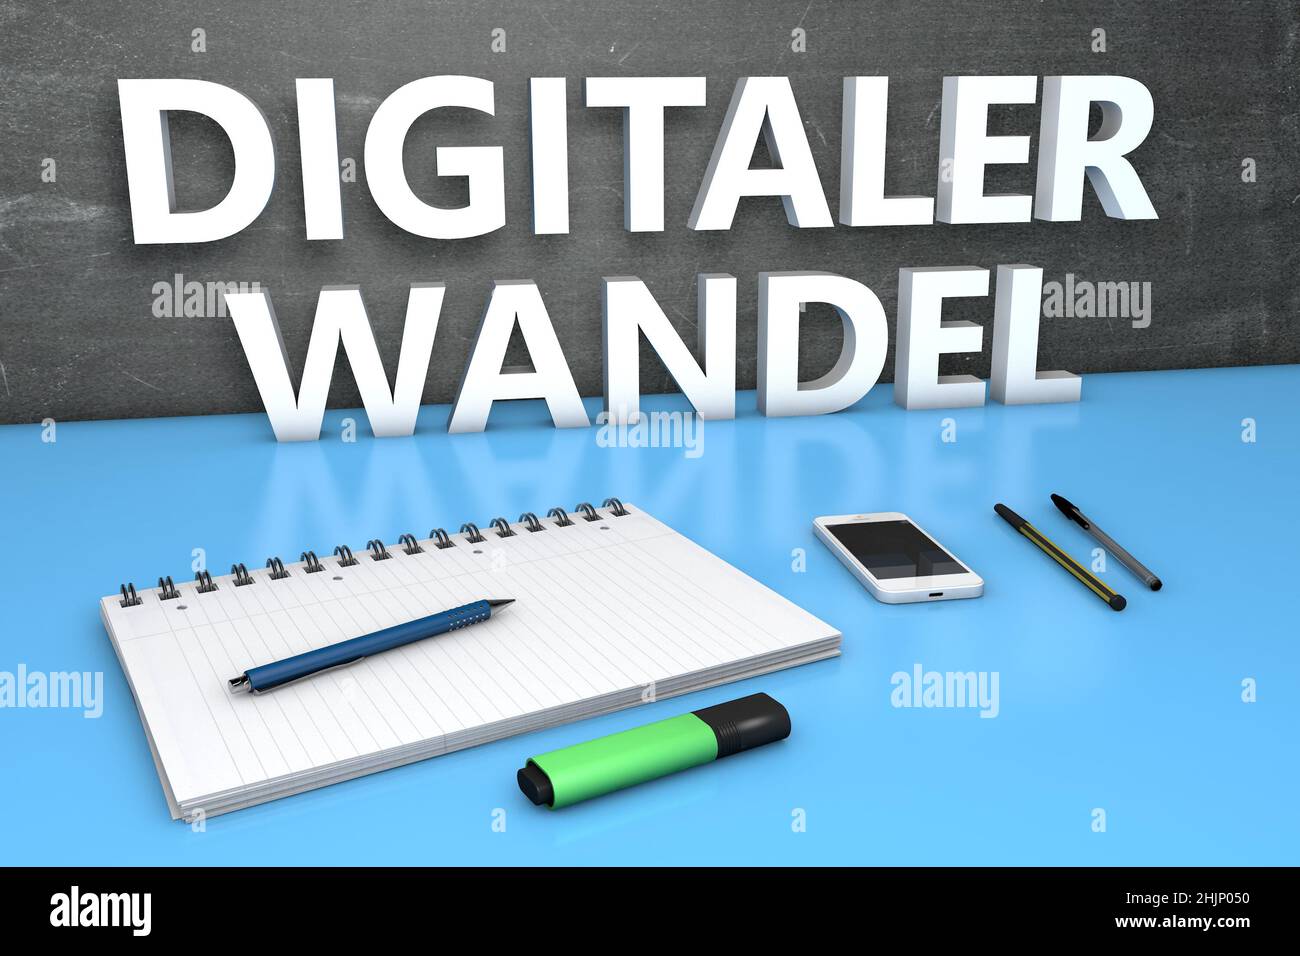 Digitaler Wandel - german word for digital change or digital business transformation - text concept with chalkboard, notebook, pens and mobile phone. Stock Photo